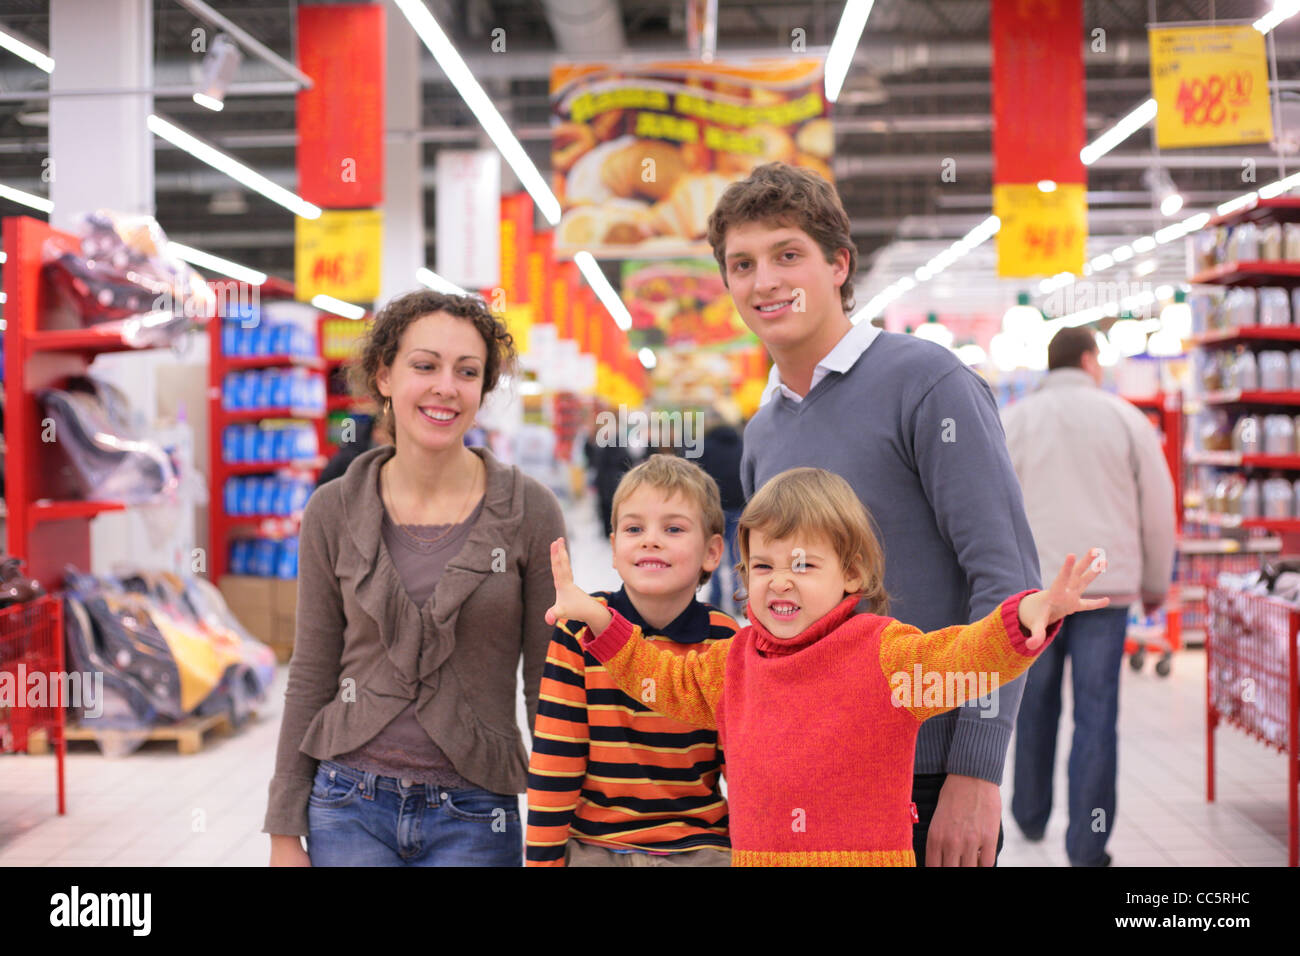 Parents with children in supermarket, focus on little girl Stock Photo